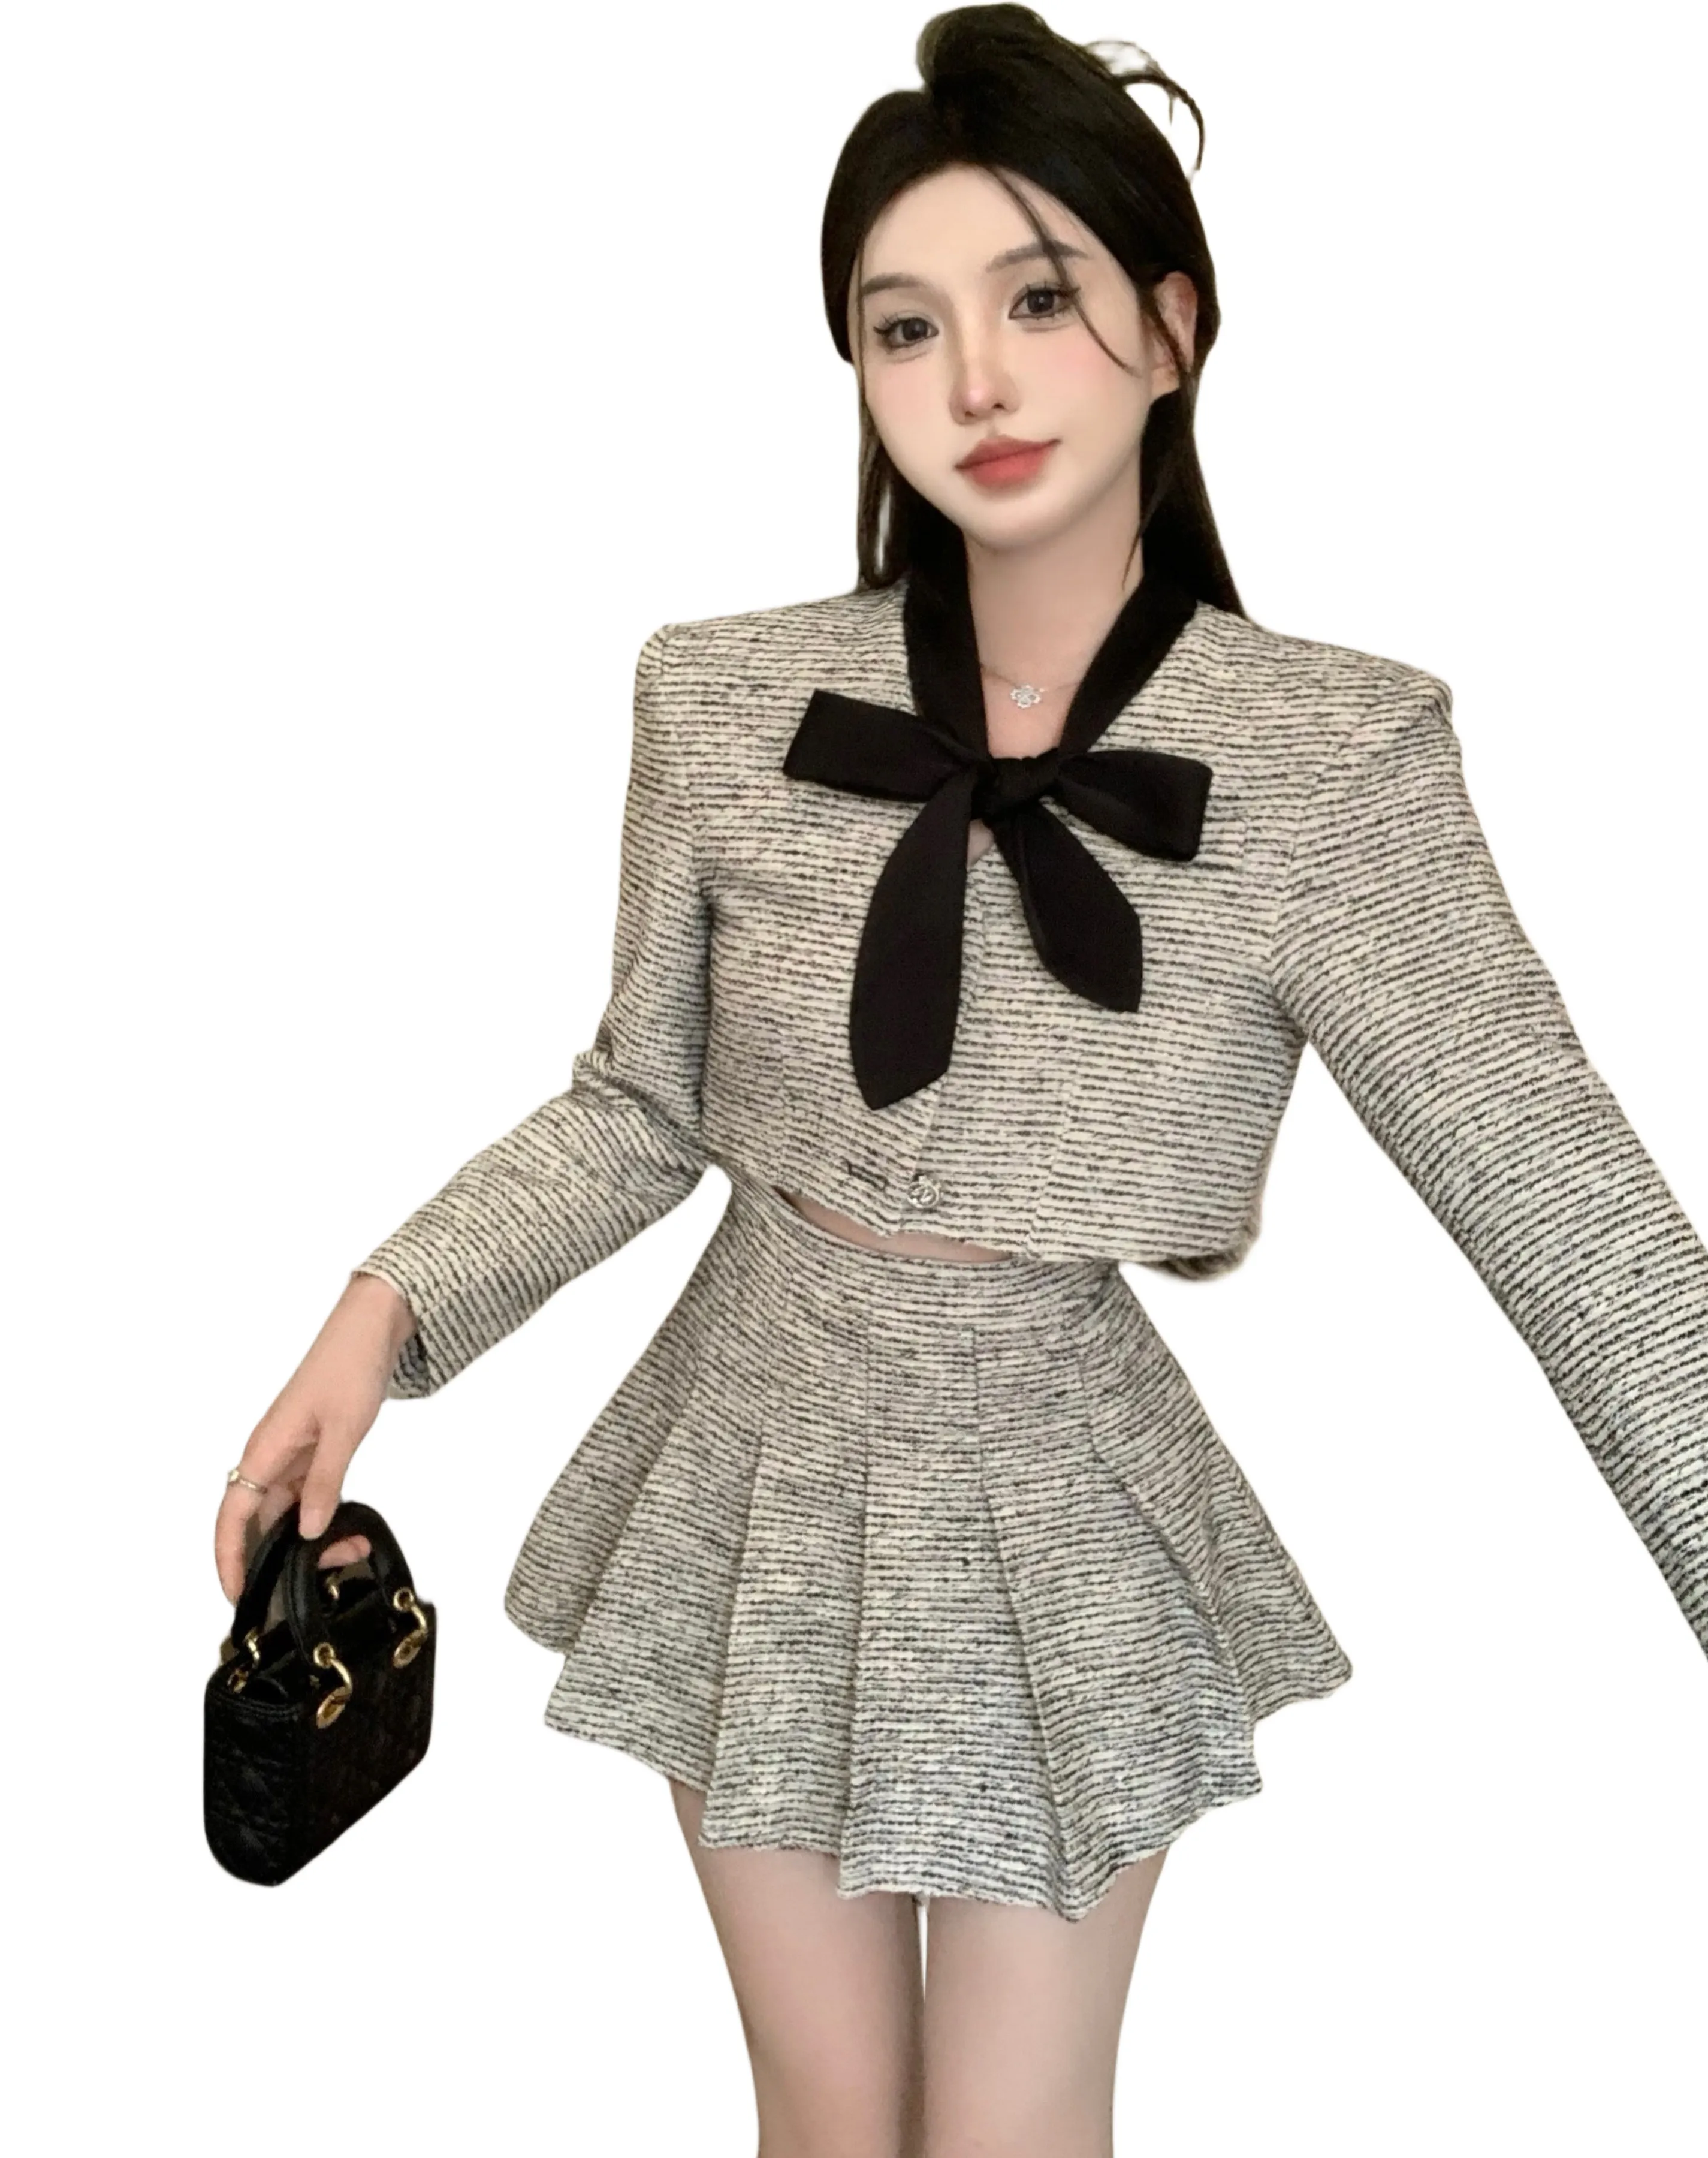 Women's autumn lacing bow collar tweed woolen high waist short jacket and pleated mini skirt twinset 2 pc dress suit SML